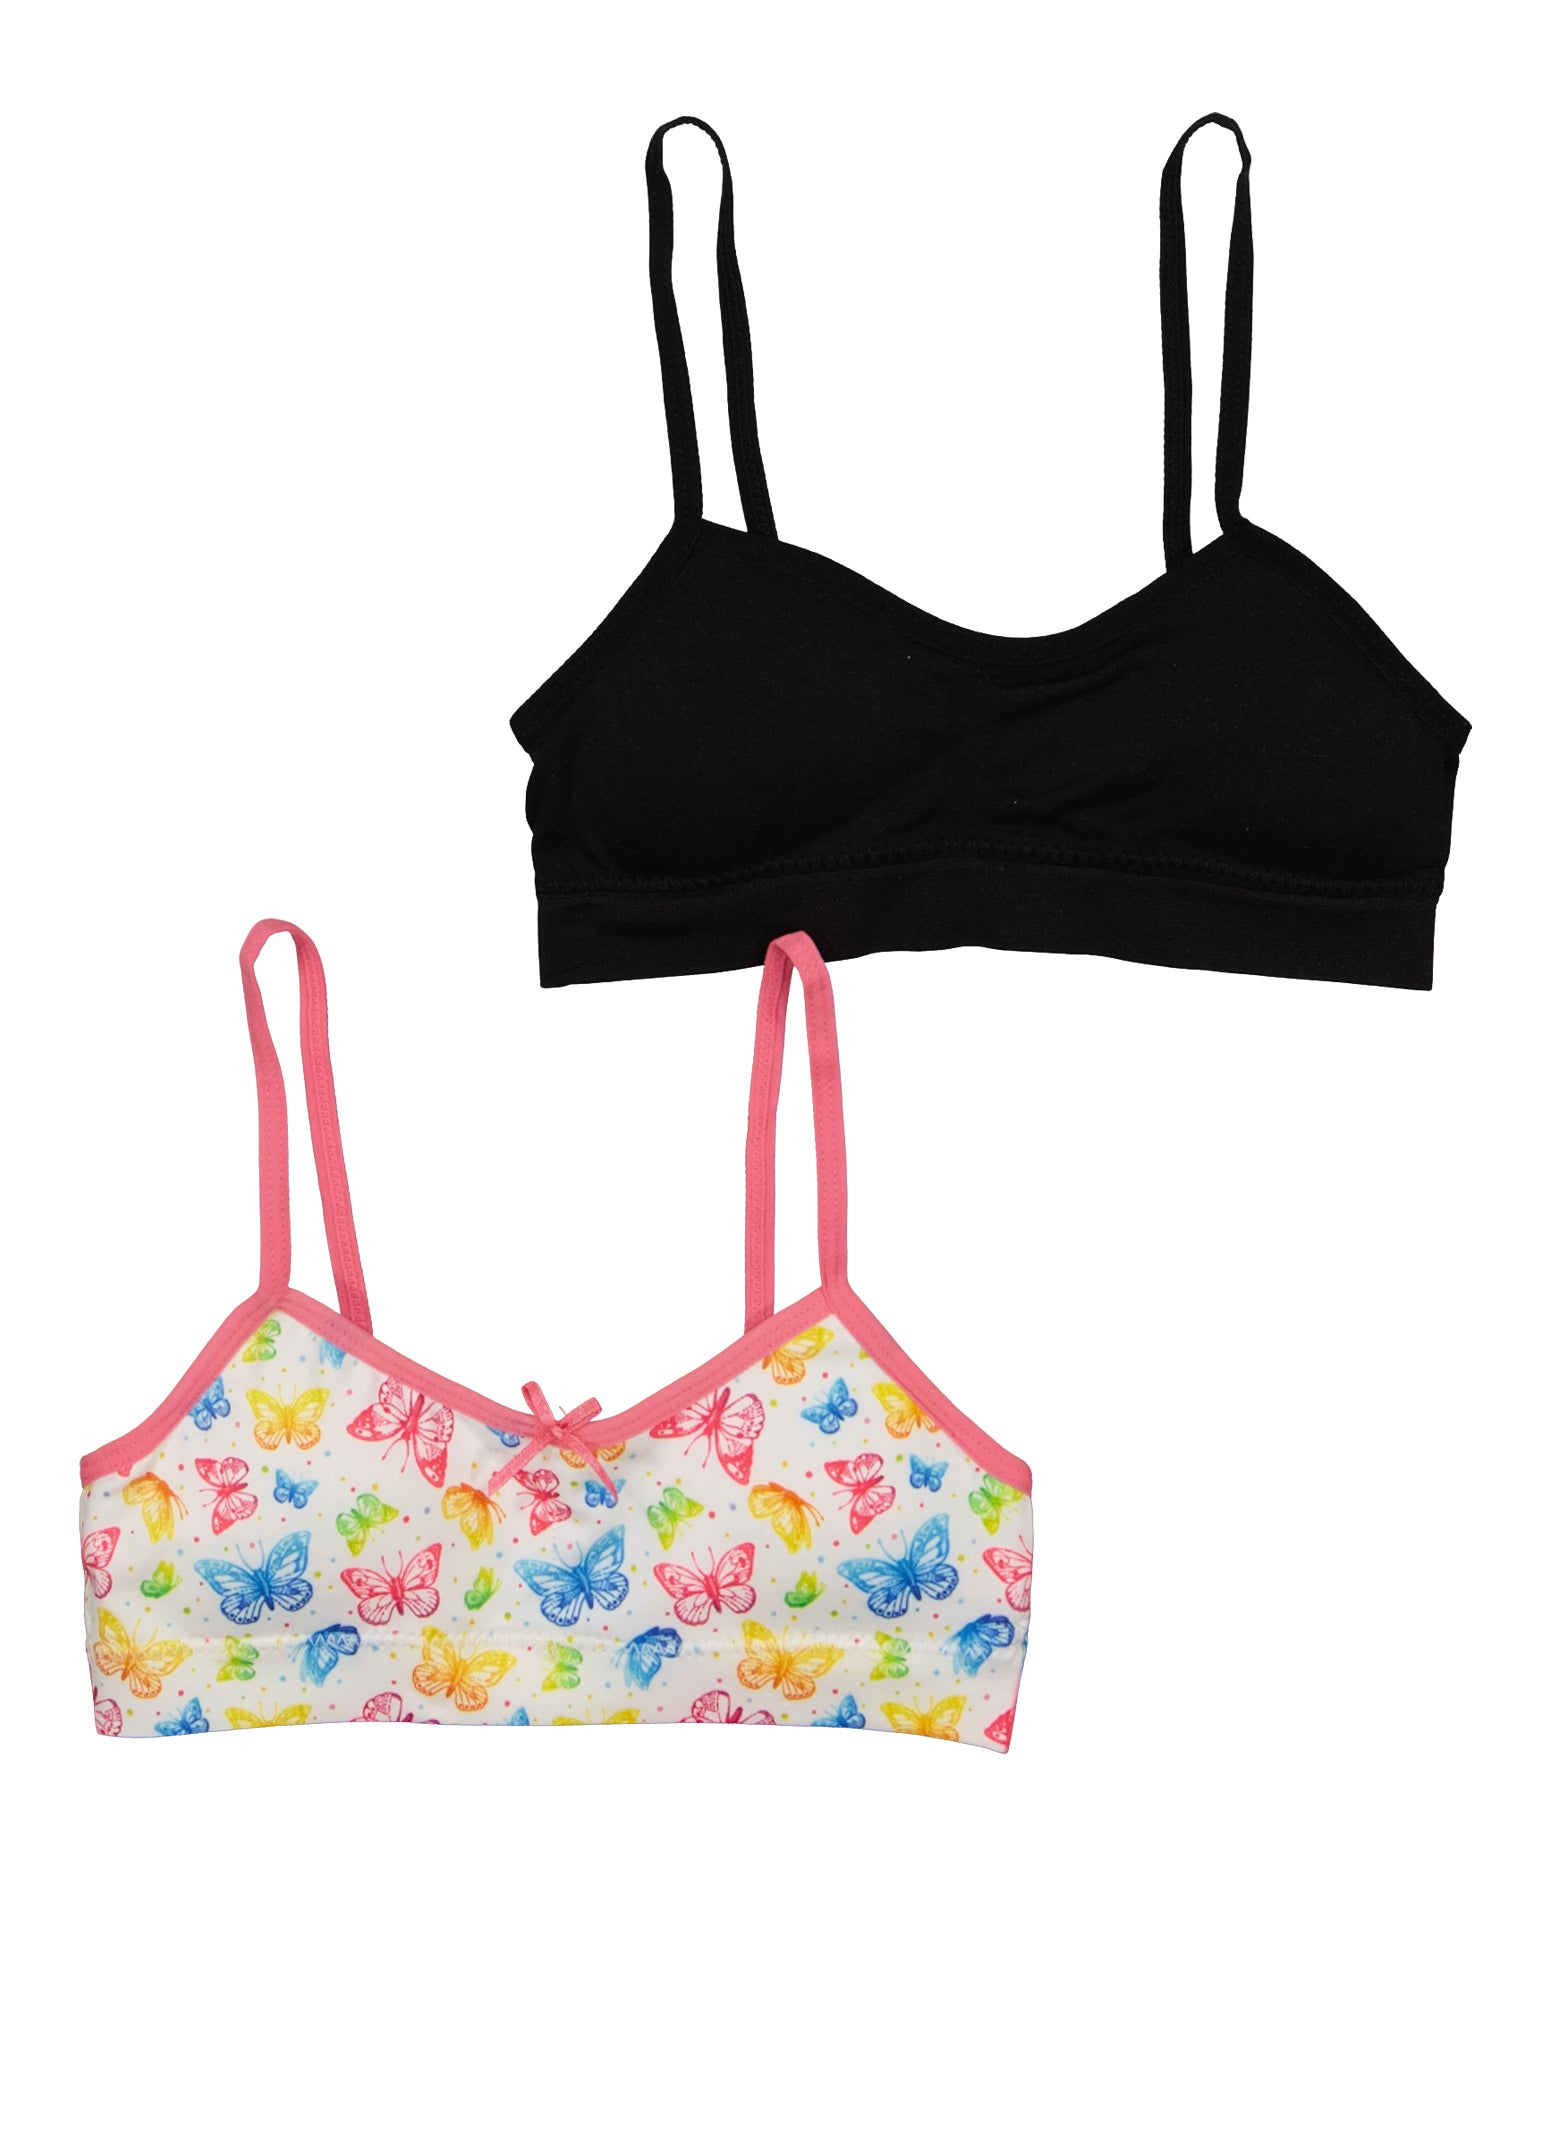 Girls Set of 2 Butterfly Print Cami Bras - Multi Color